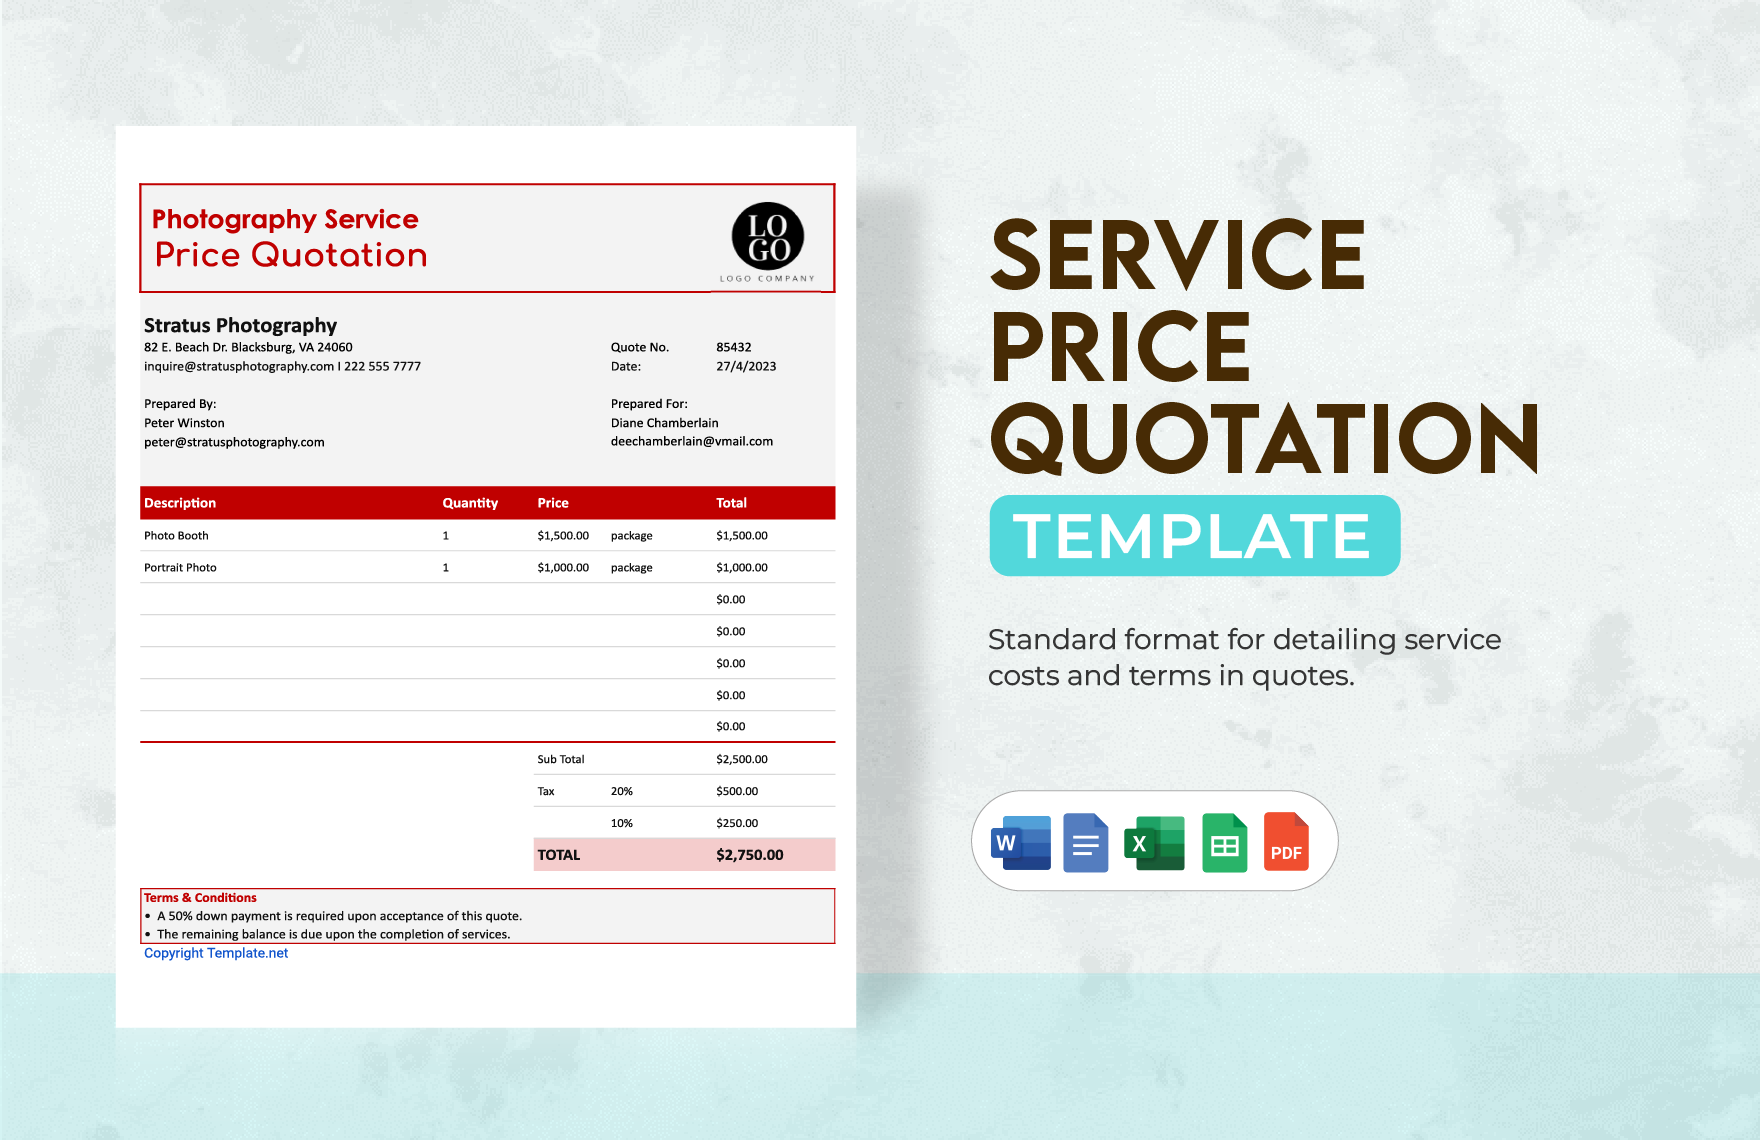 Service Price Quotation Template in Word, Google Docs, Excel, PDF, Google Sheets